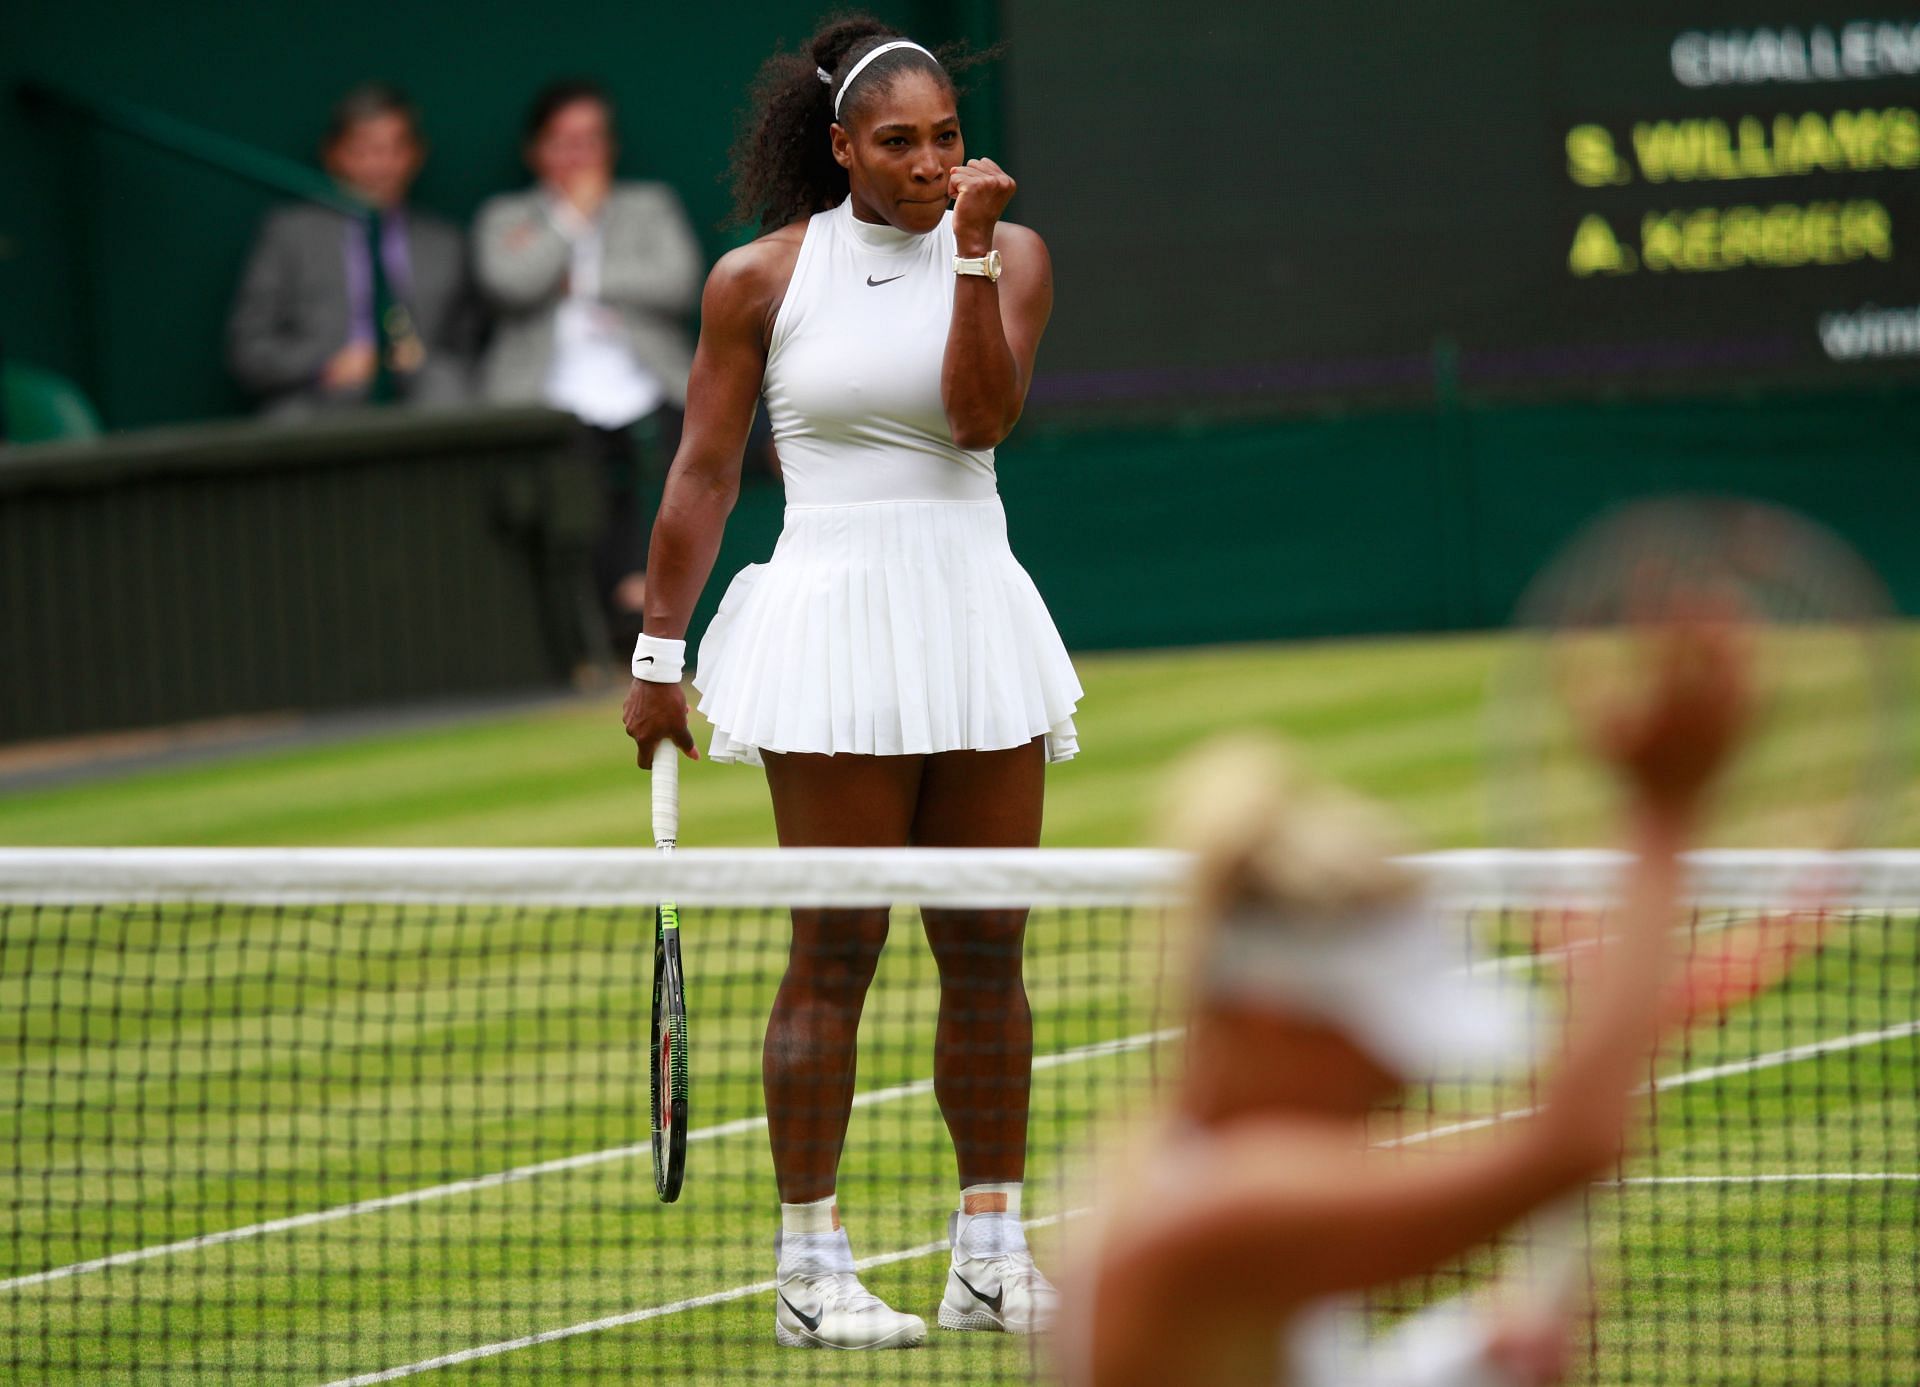 Serena Williams last won a Wimbledon title in 2016 beating Angelique Kerber in the finals